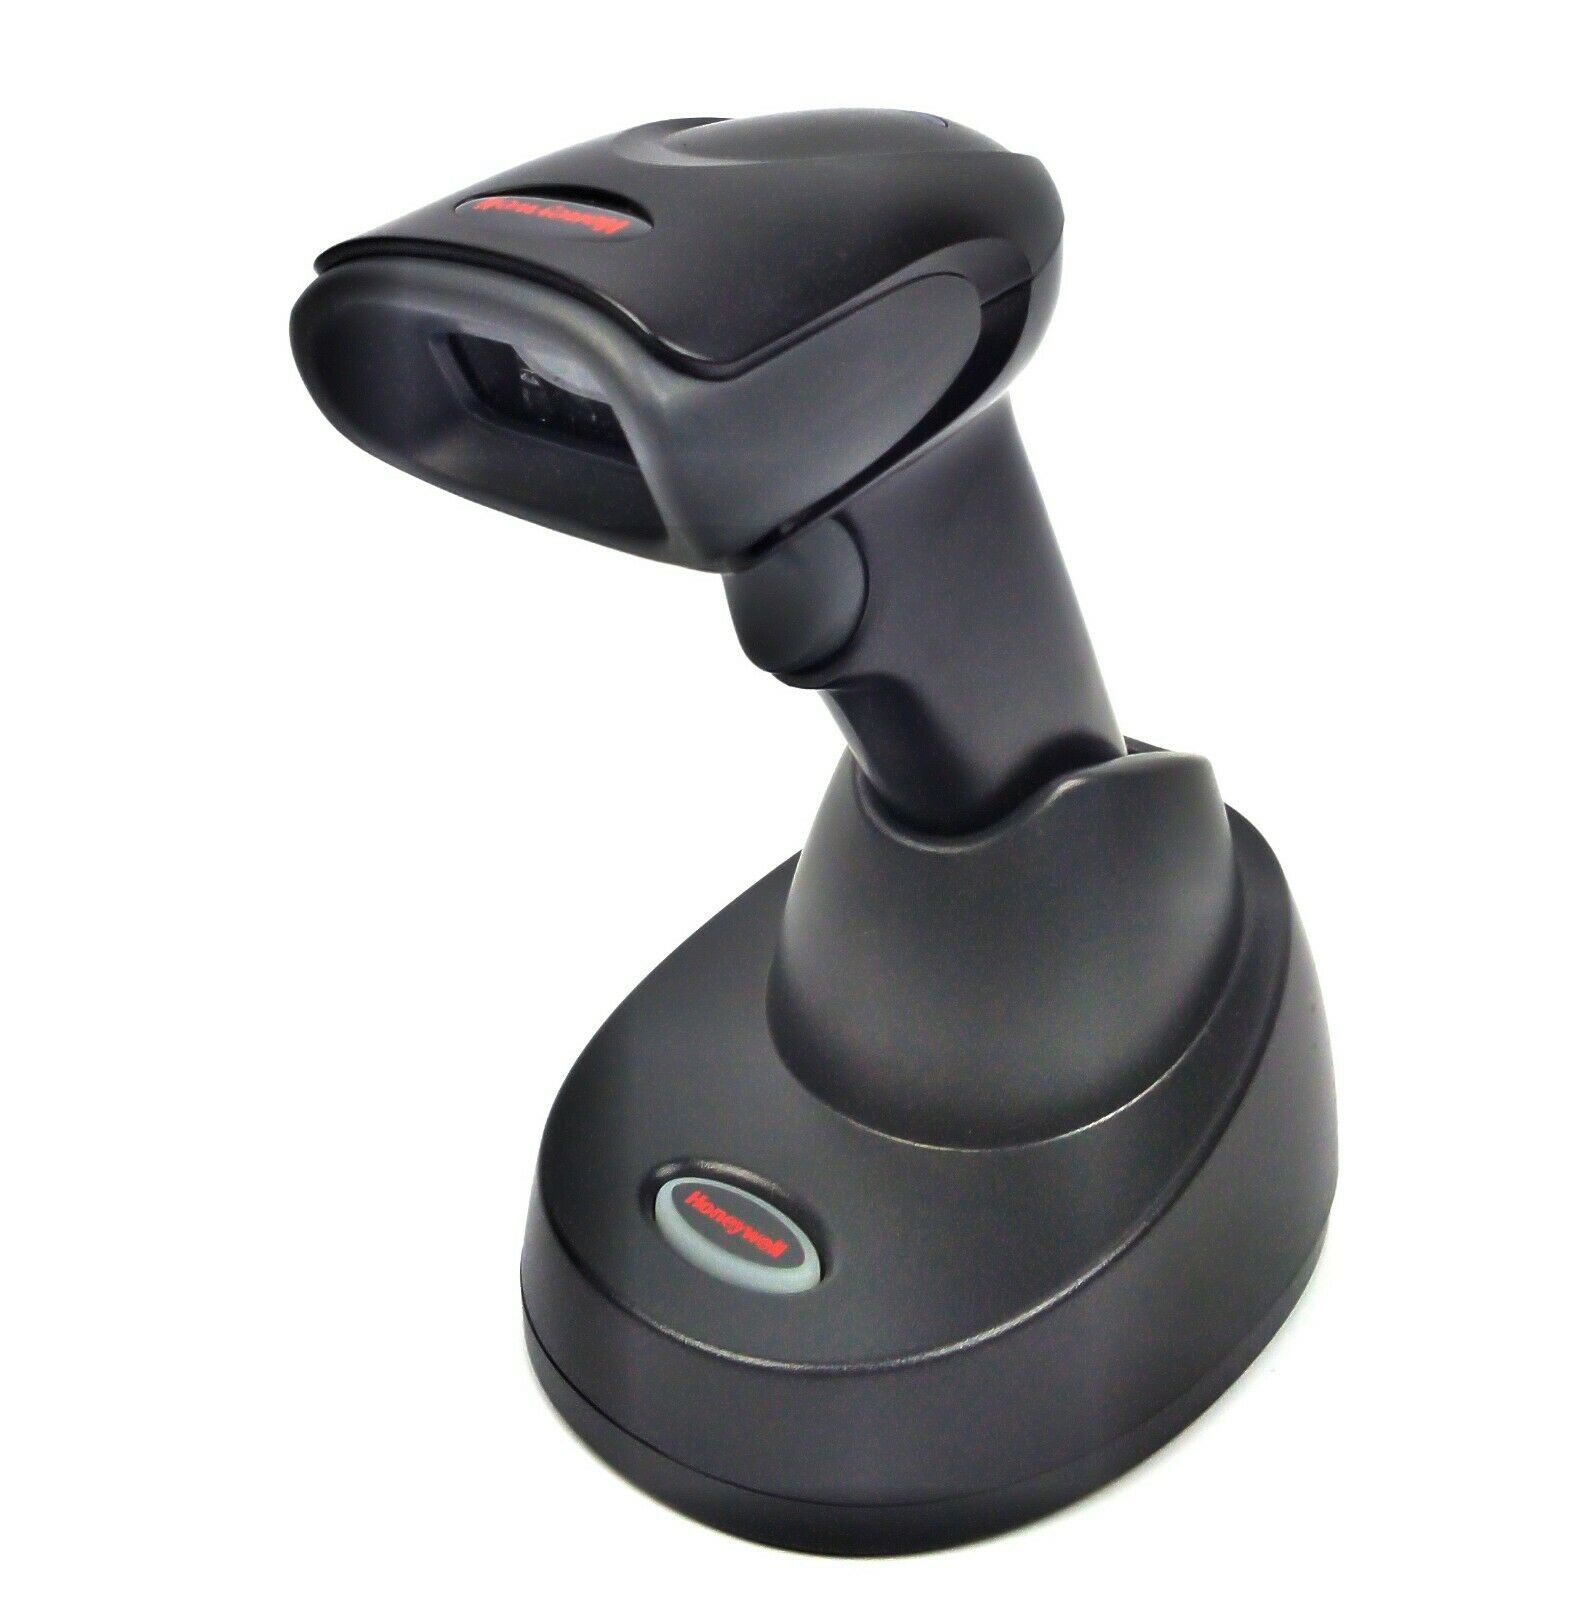 Honeywell Voyager 1452G Handheld 2D Barcode Scanner with Base 1452G2D-2-INT.